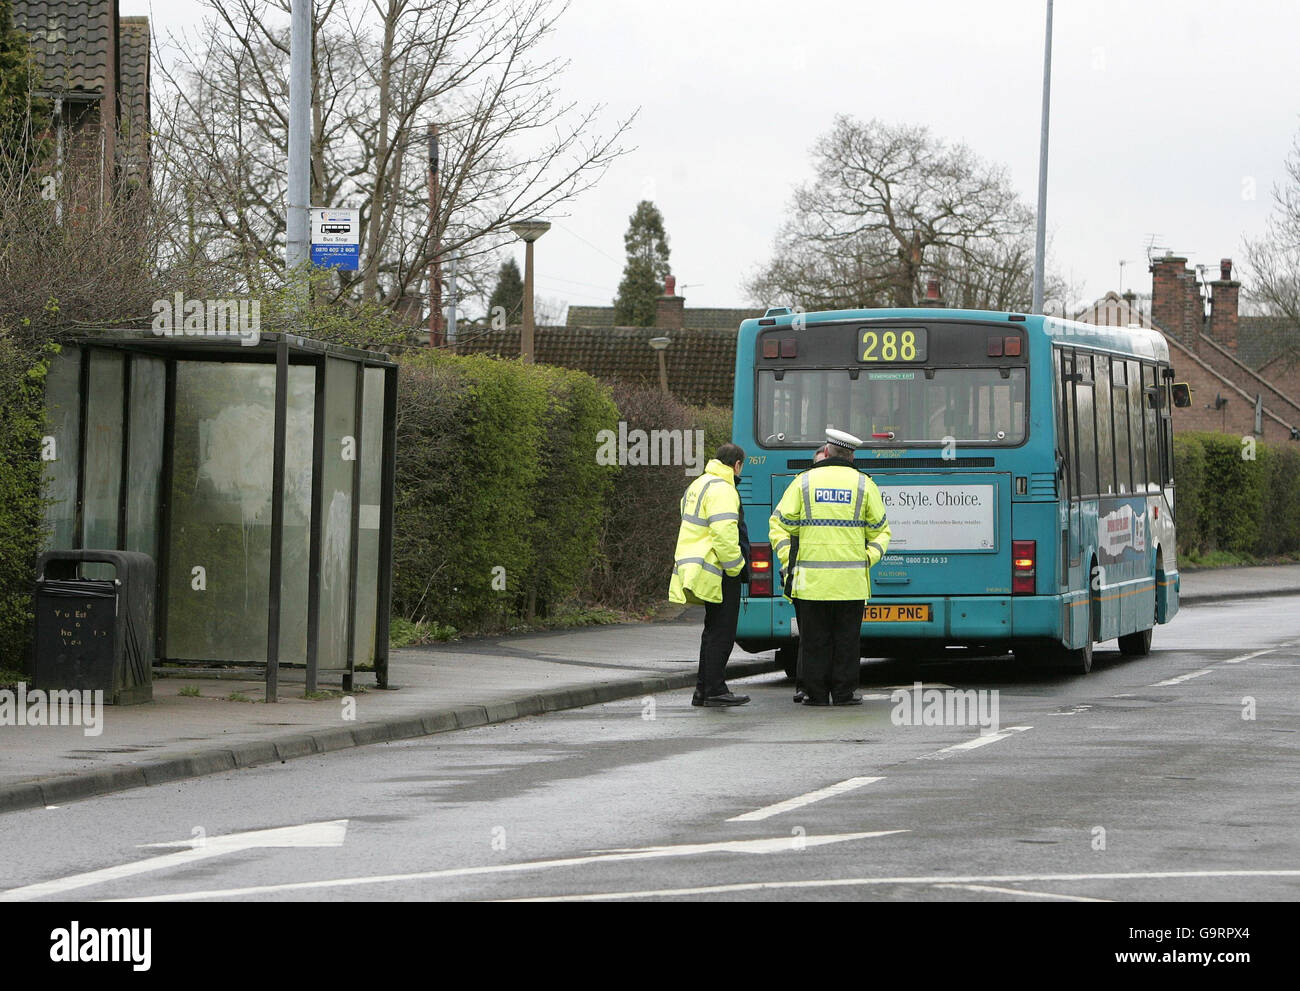 Bus kills two in Knutsford. Police inspect a bus that struck and killed two women on Mobberley Road, Knutsford, Cheshire. Stock Photo